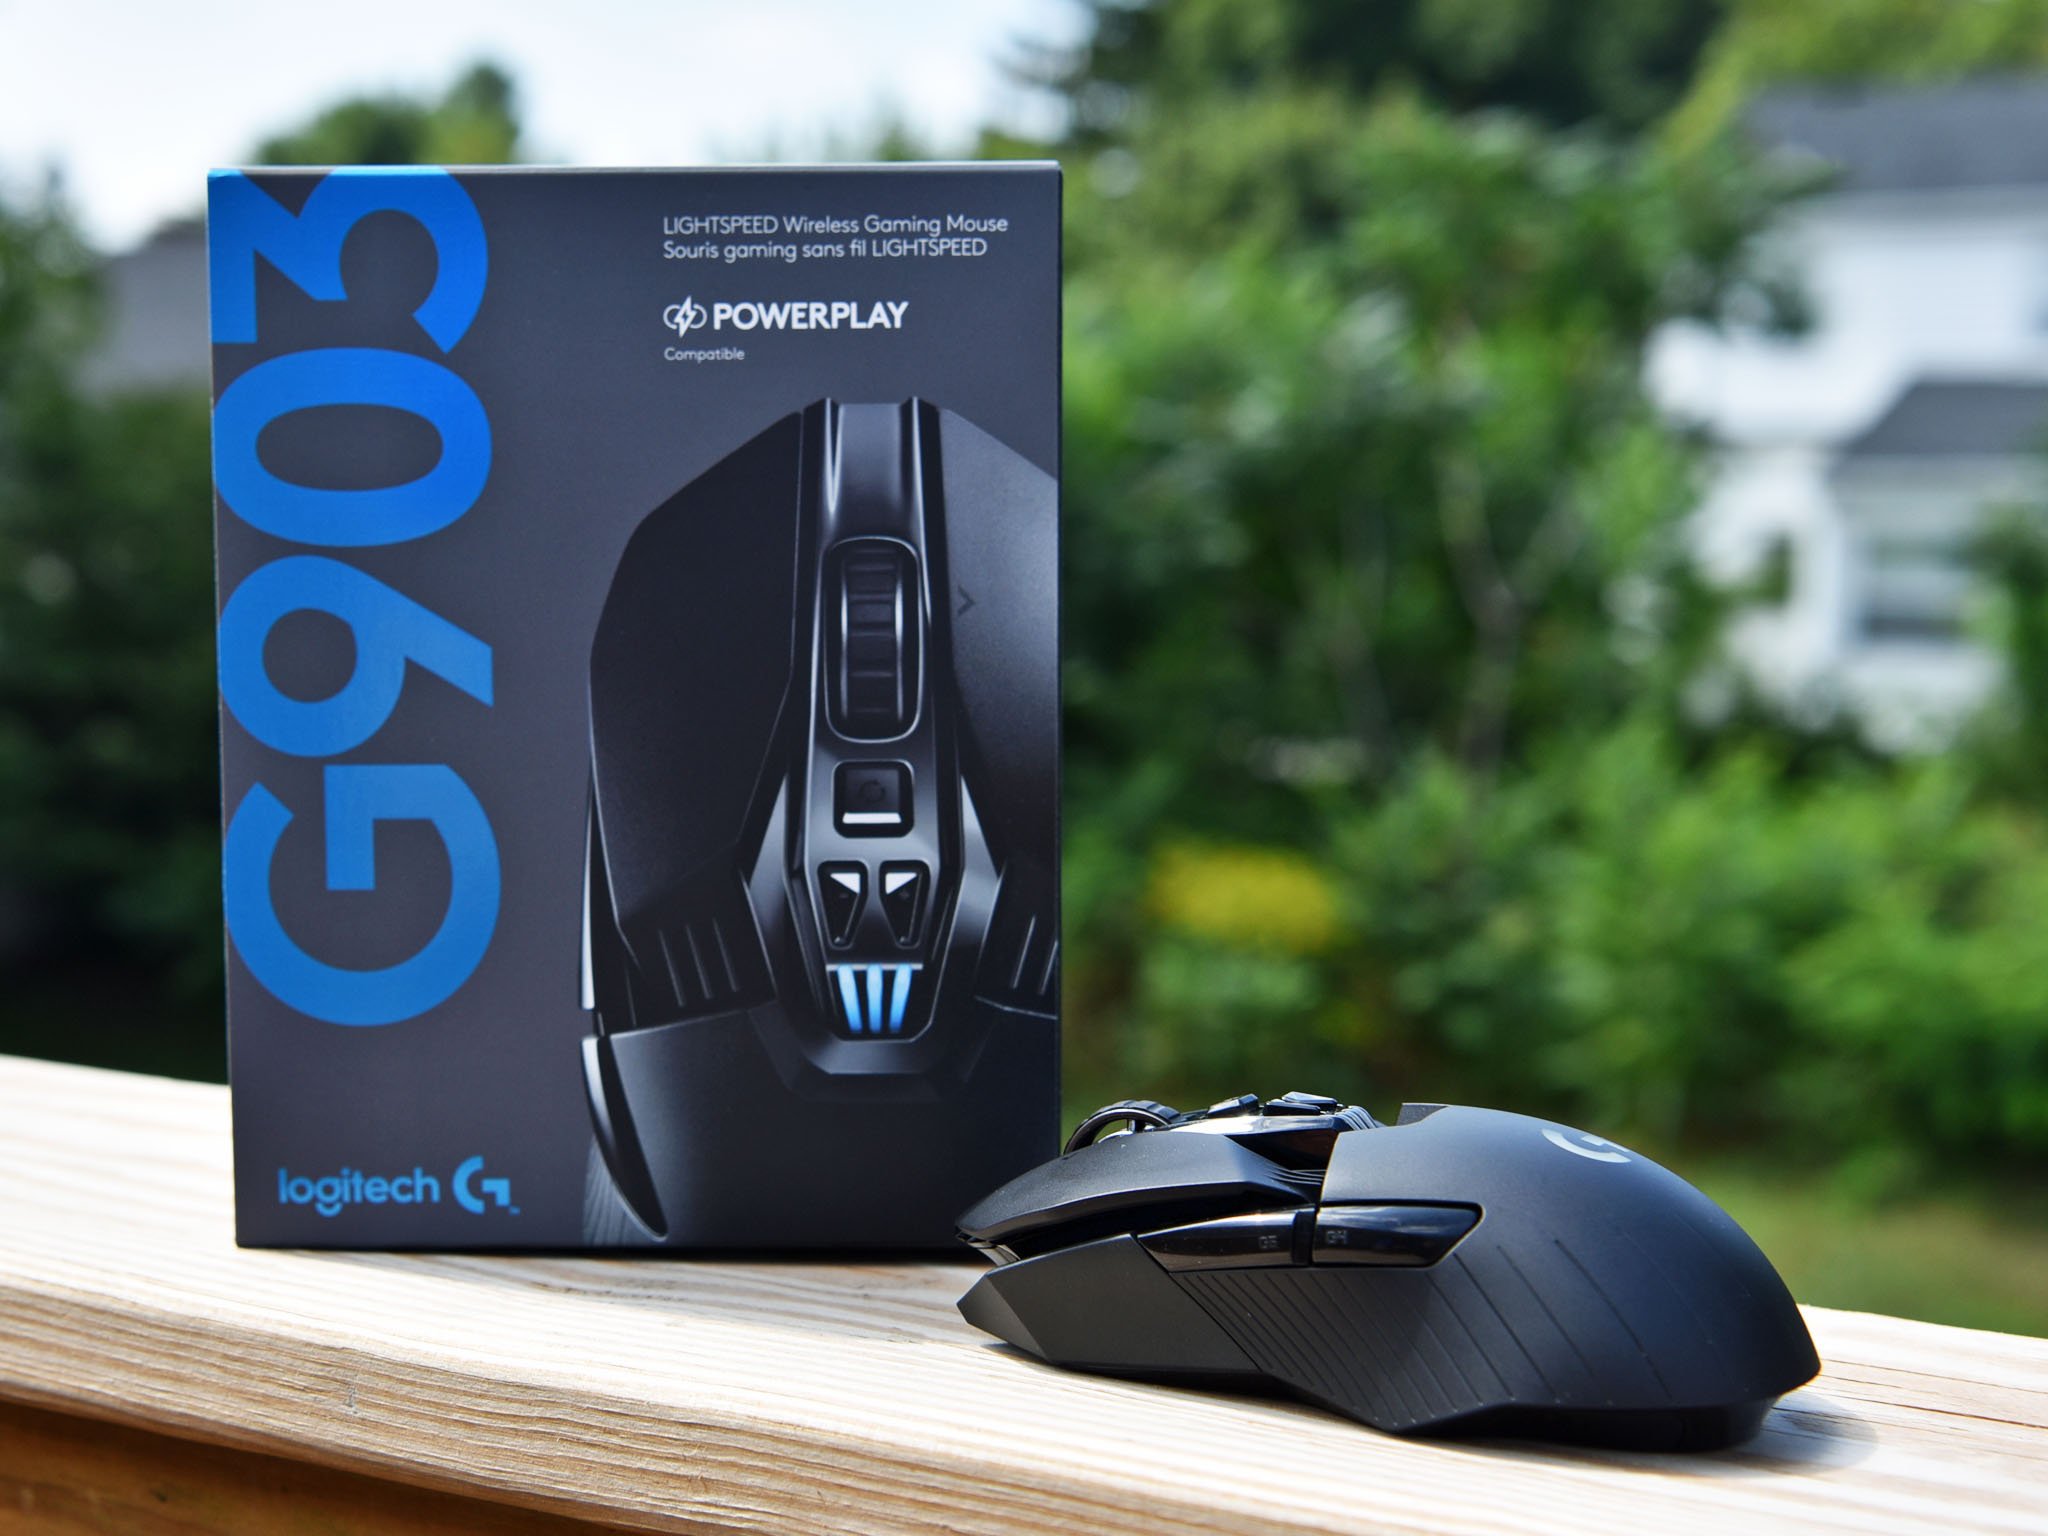 Logitech G903 A serious optical gaming mouse with charging | Windows Central